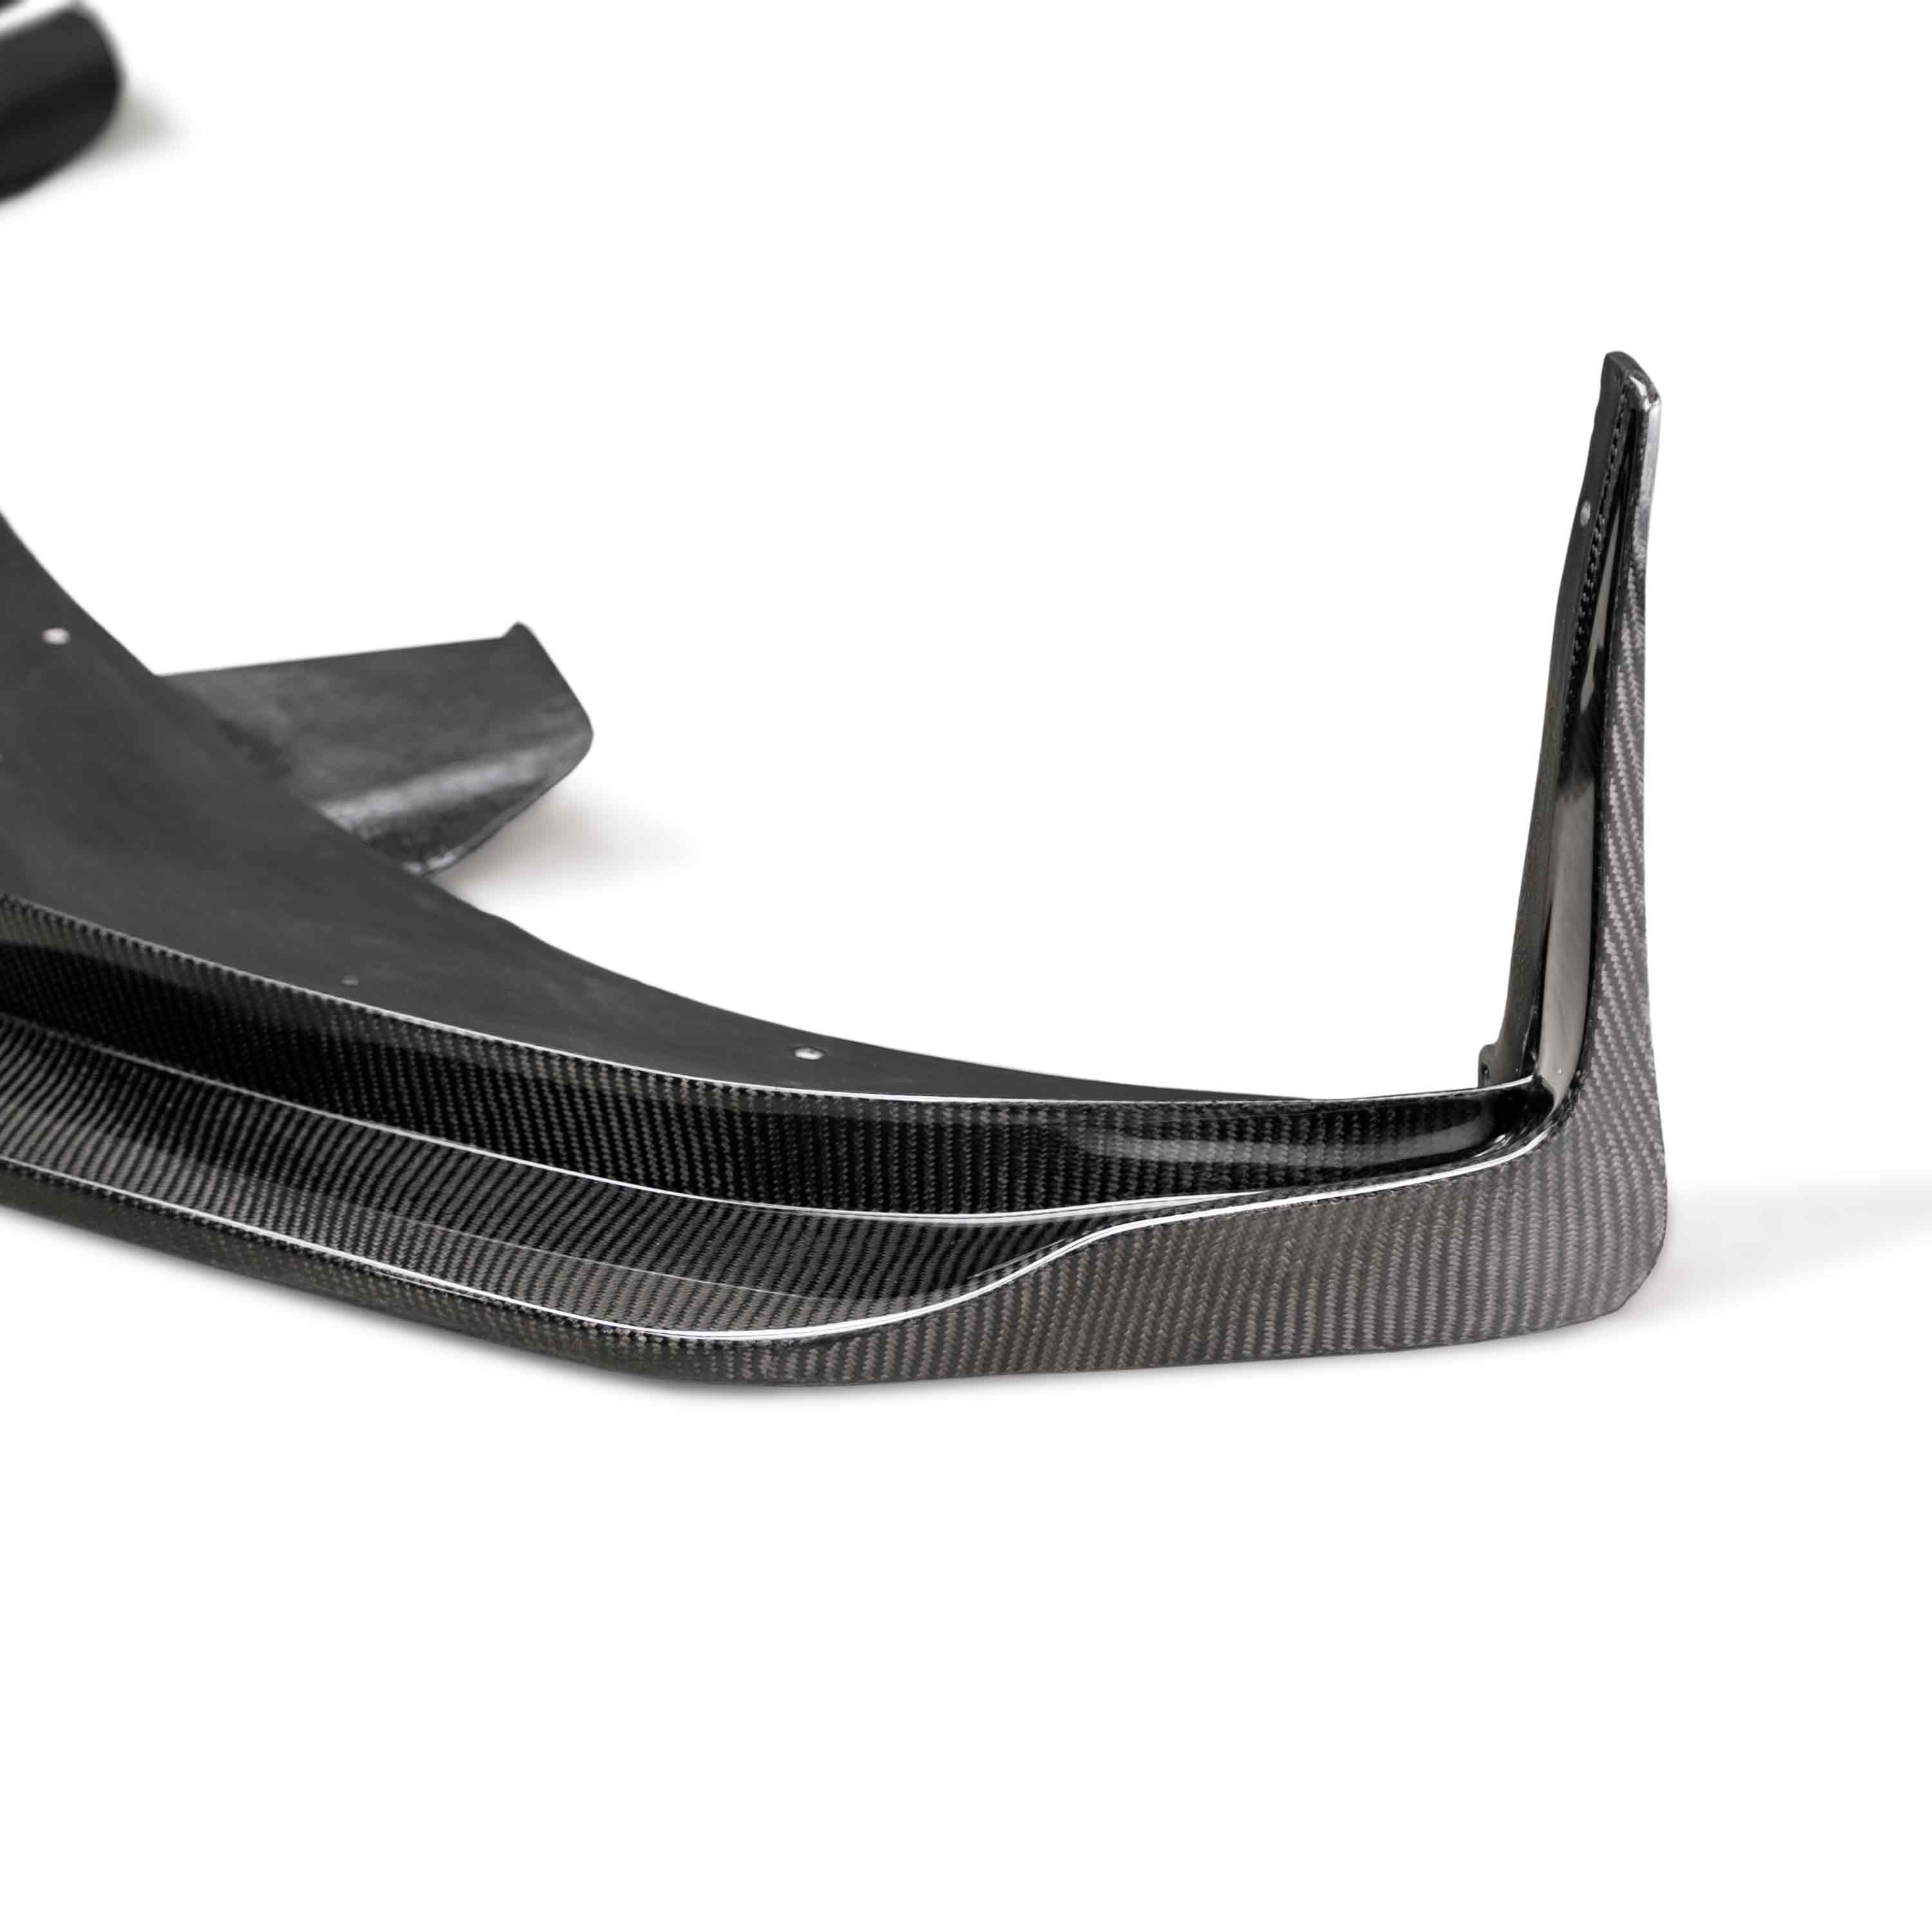 2020-2023 Dodge Charger Widebody Carbon Fiber Front Chin Spoiler